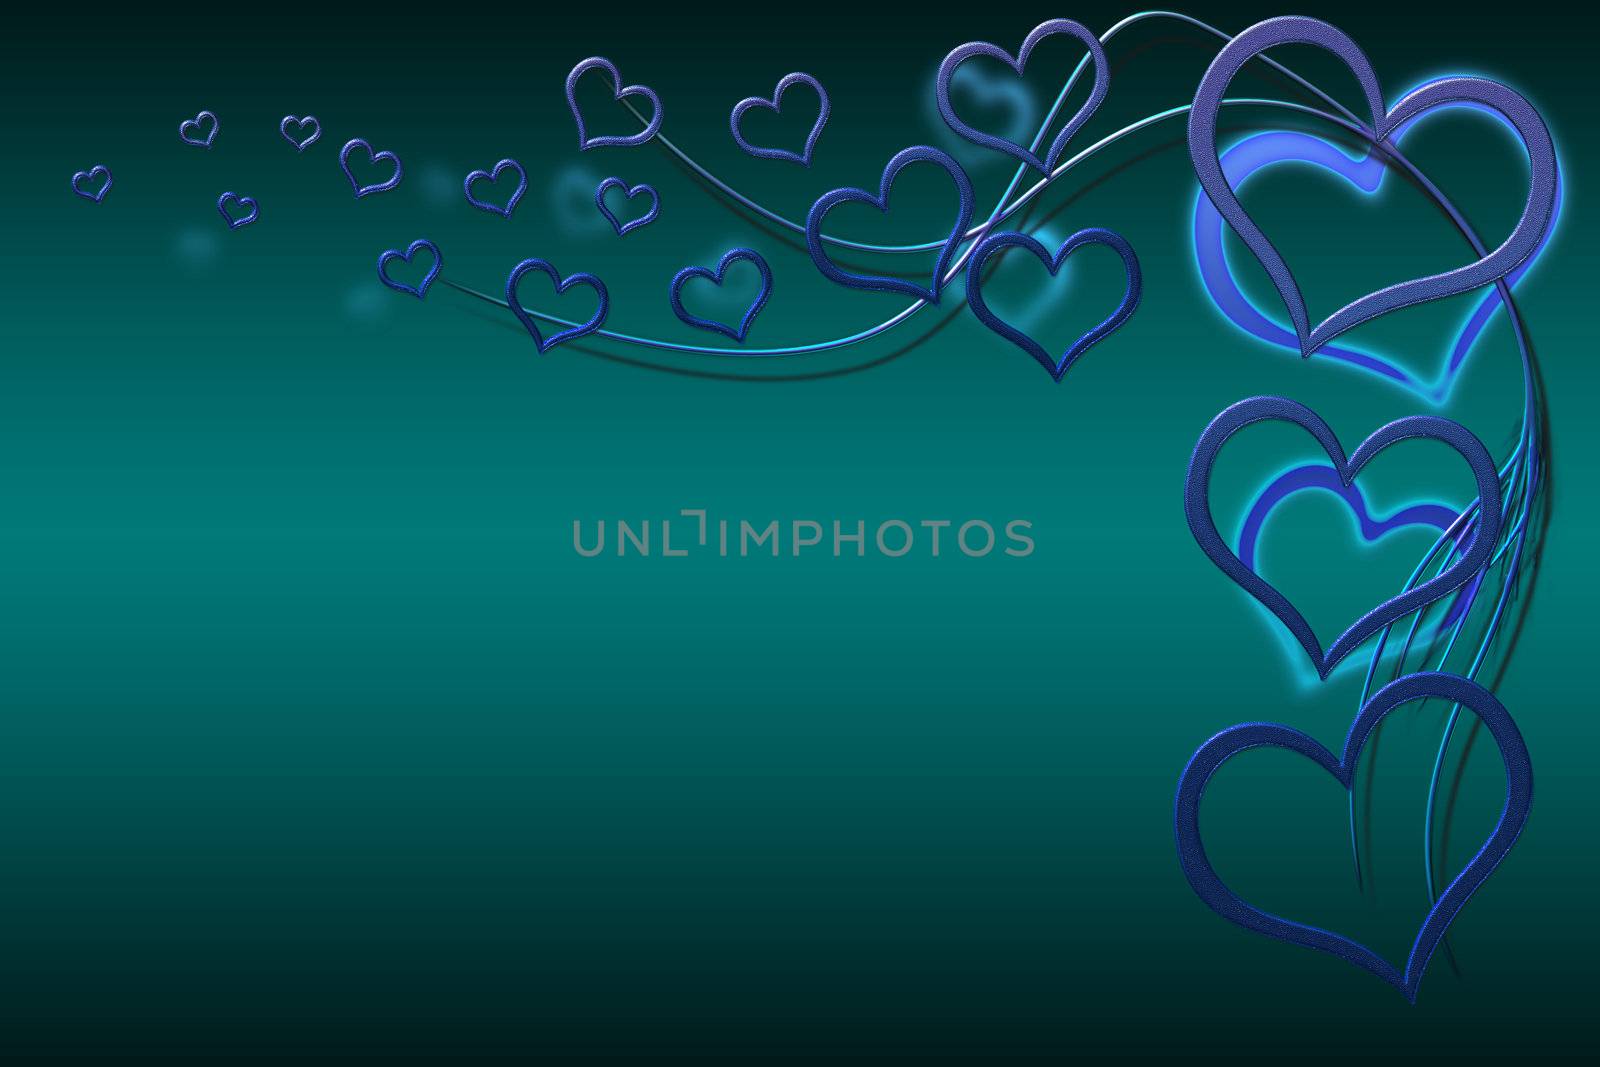 Valentines day background for your designs with blue hearts and swirls on green background